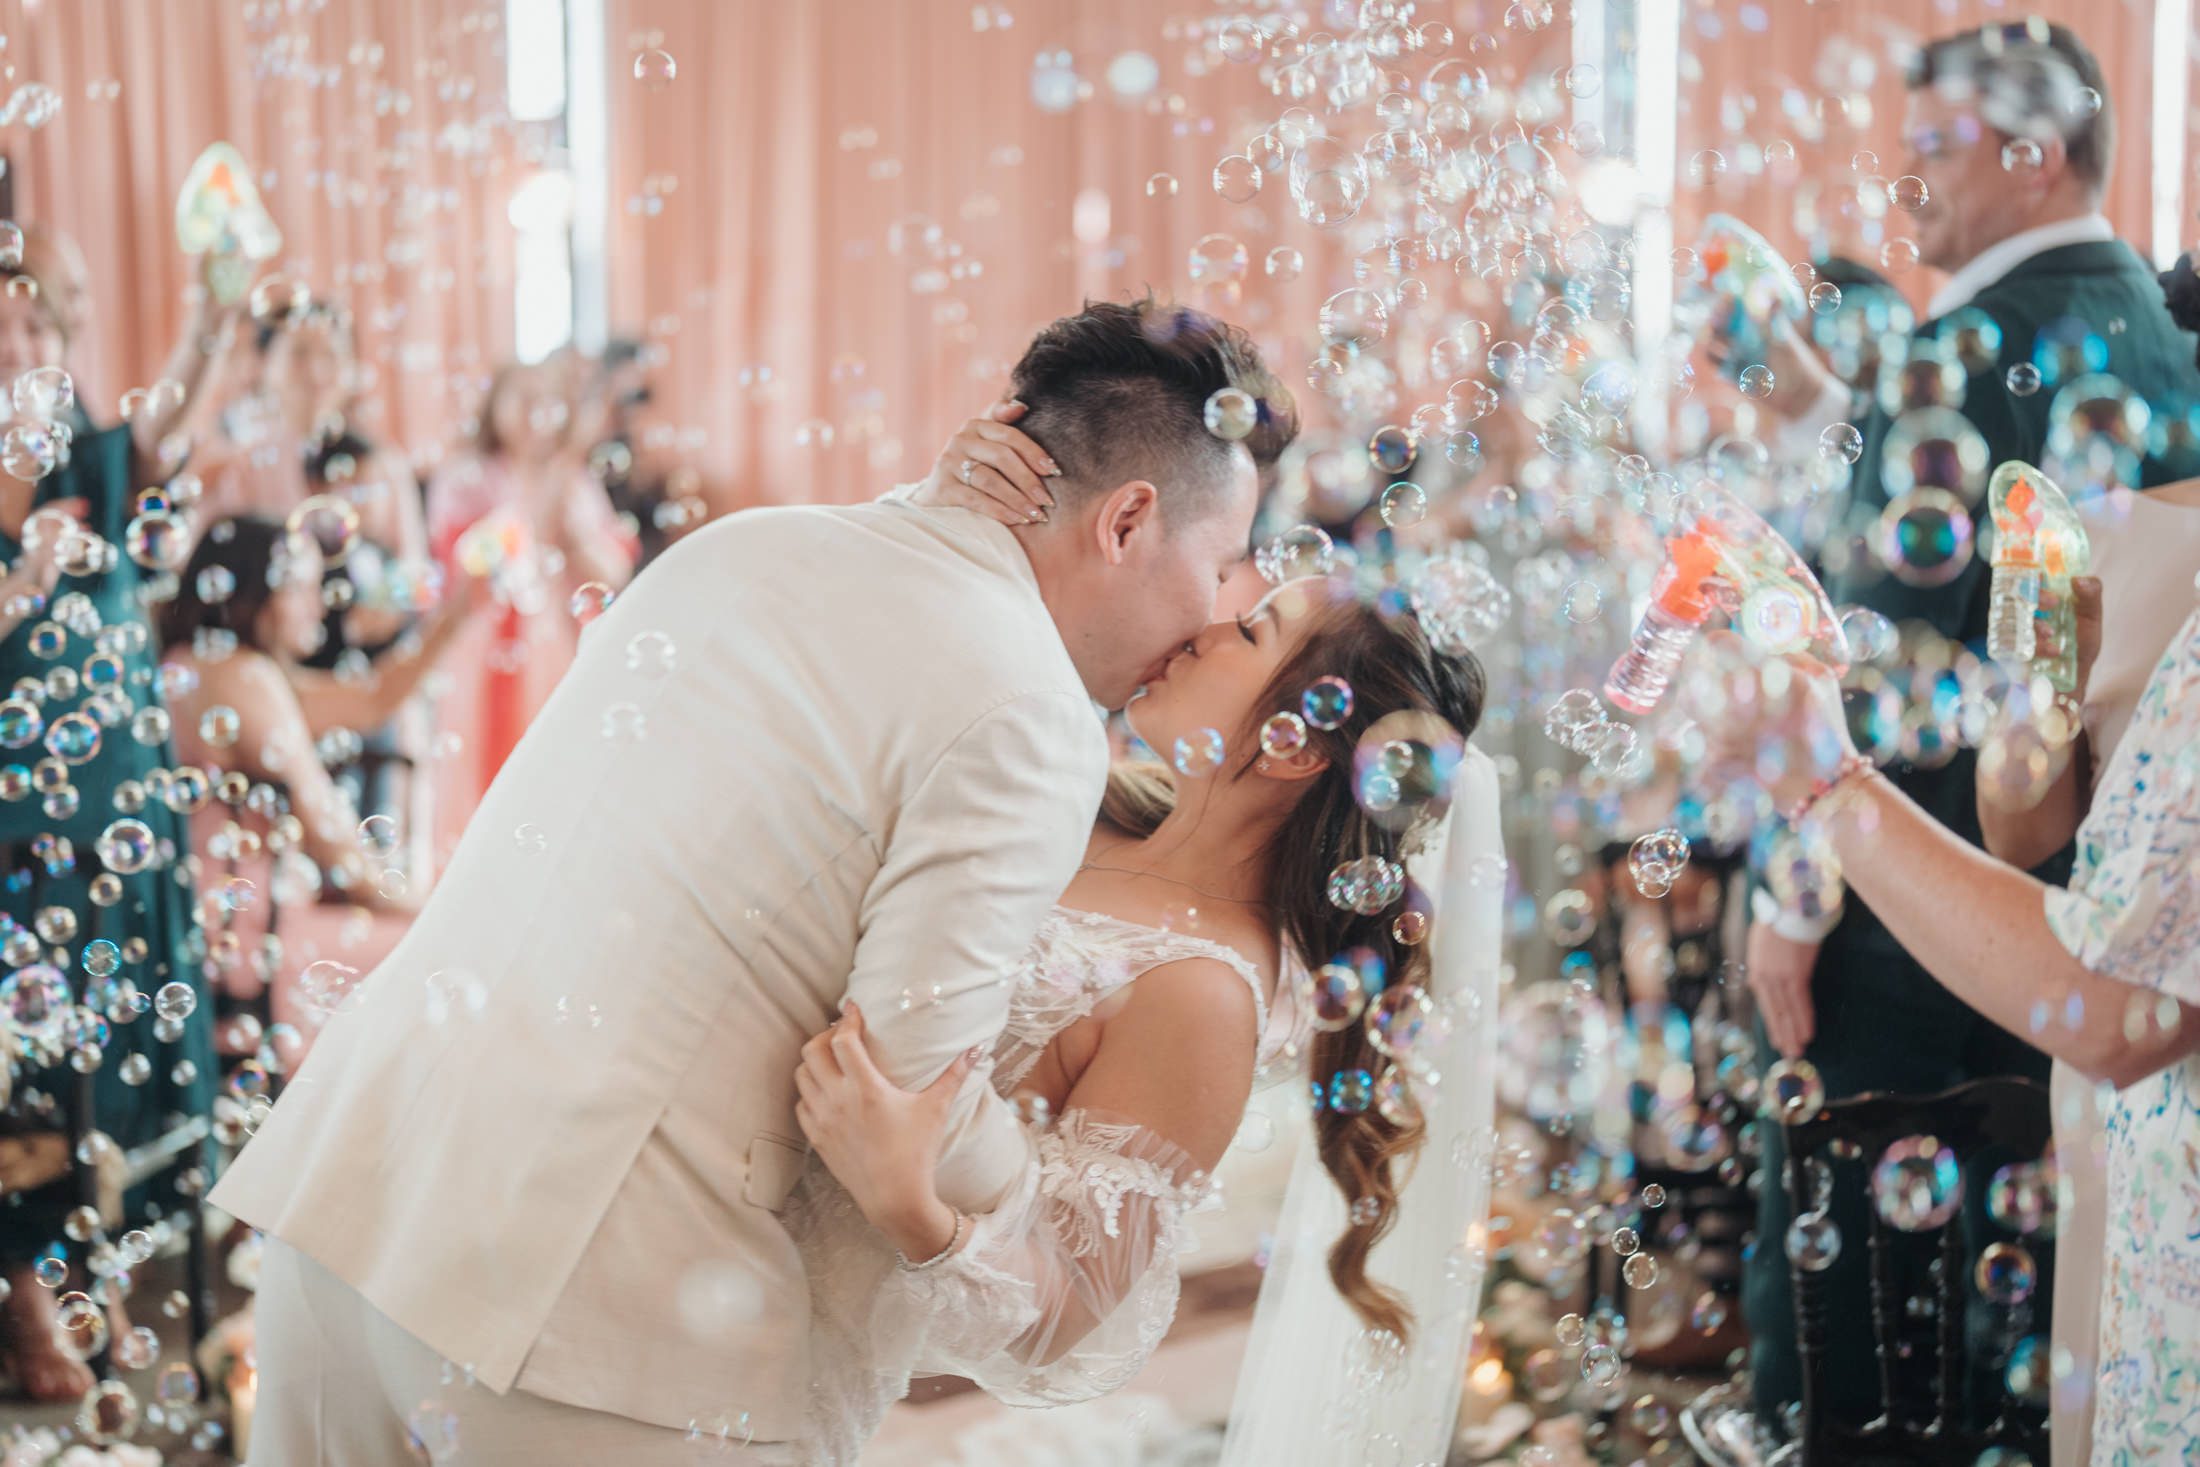 Romantic scene as the newlyweds share a kiss surrounded by bubbles from bubble guns held by joyful guests, creating an enchanting atmosphere of love and celebration